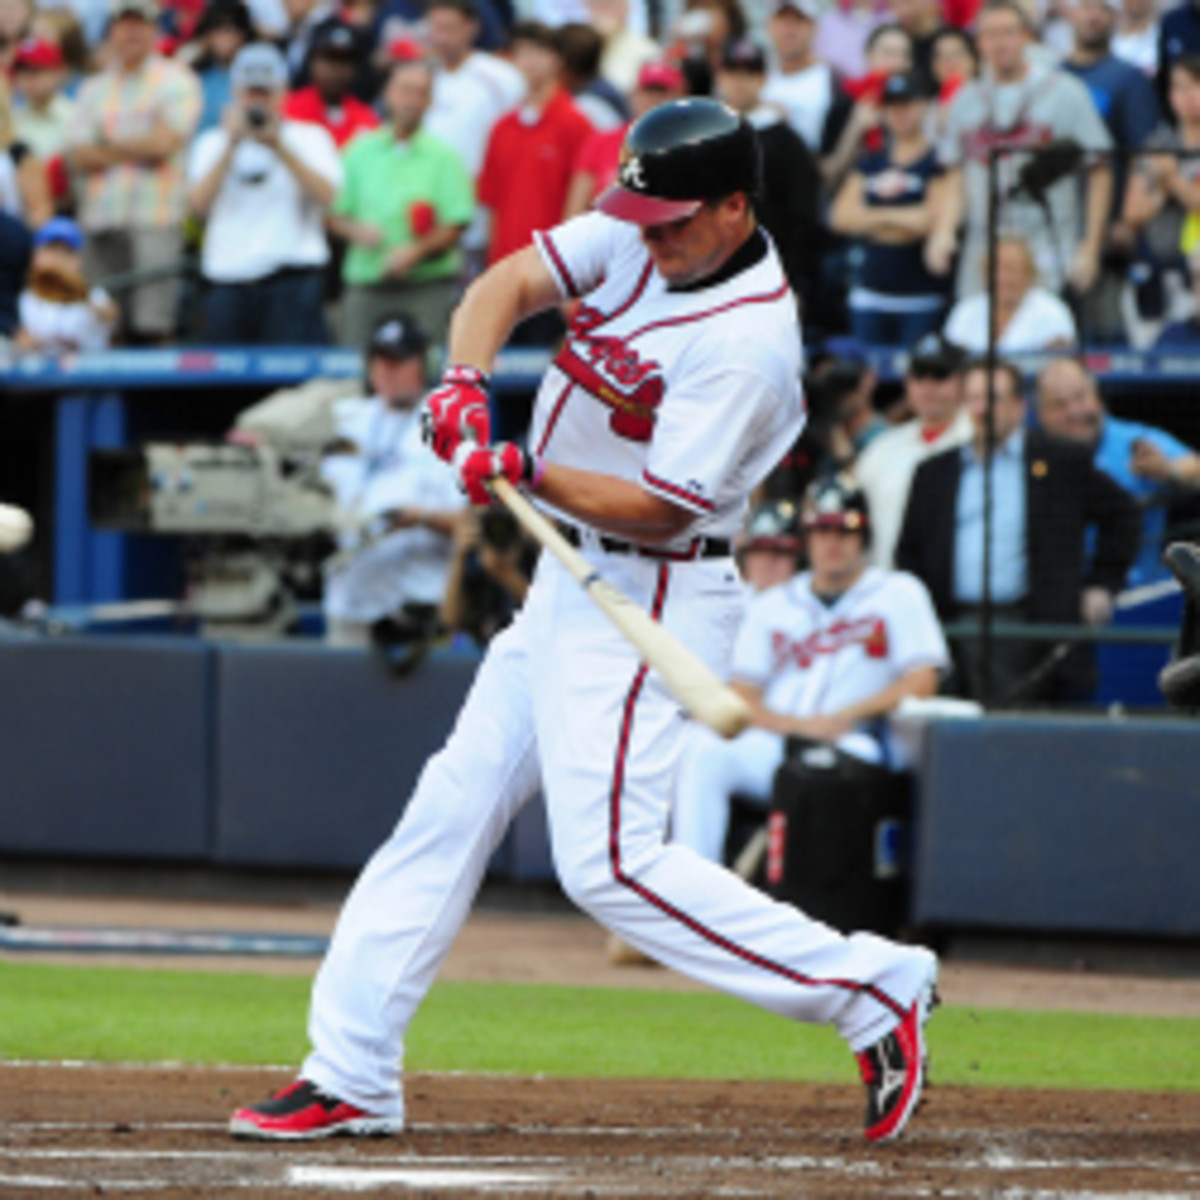 Braves great Chipper Jones inducted into Baseball Hall of Fame